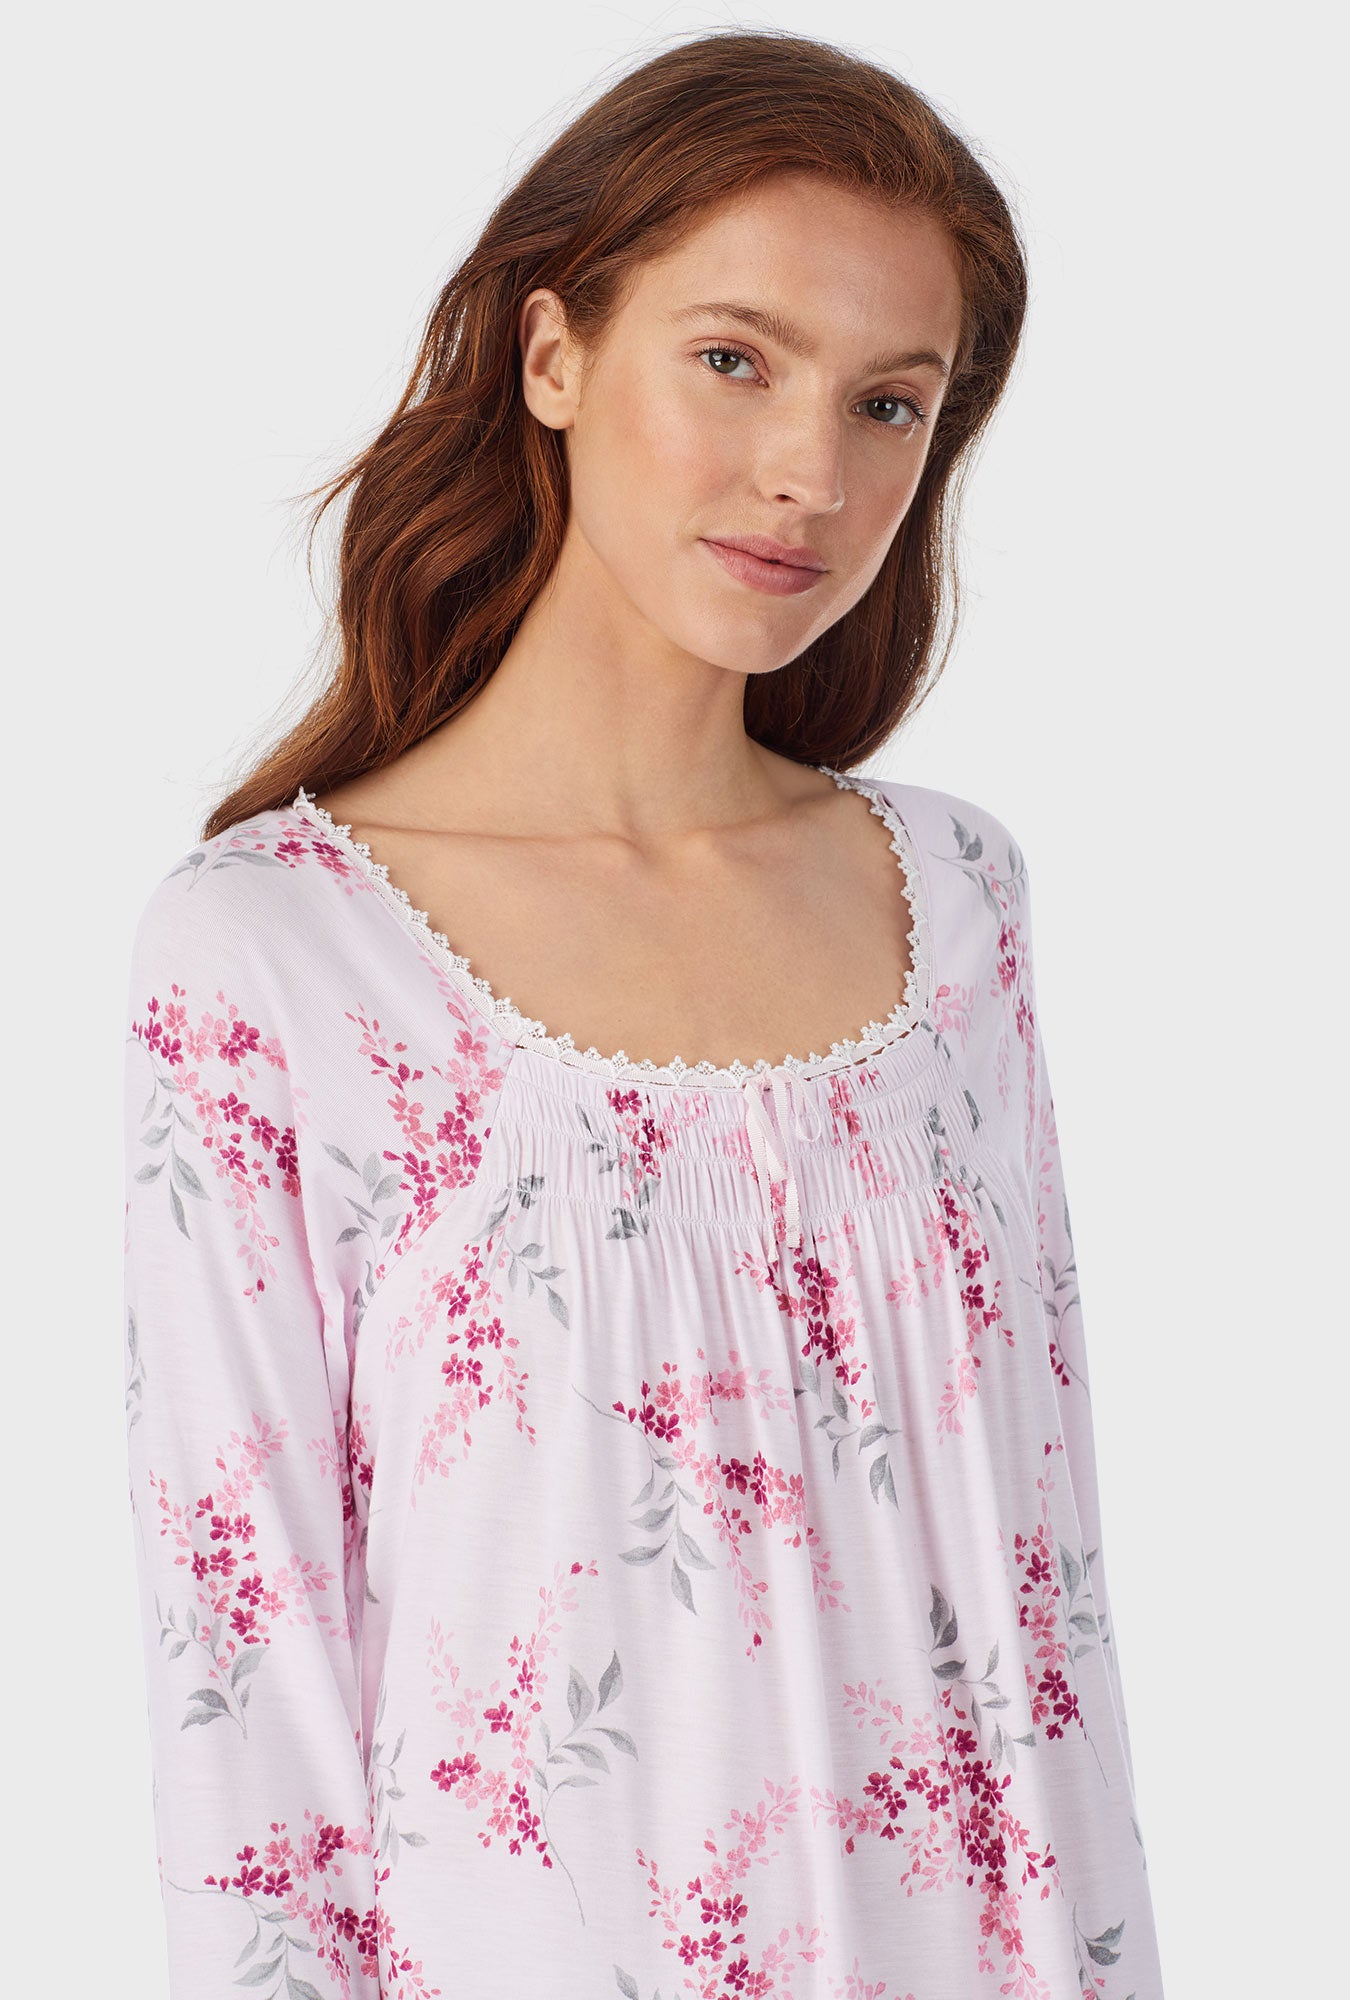 A lady wearing white waltz nightgown with pink floral print